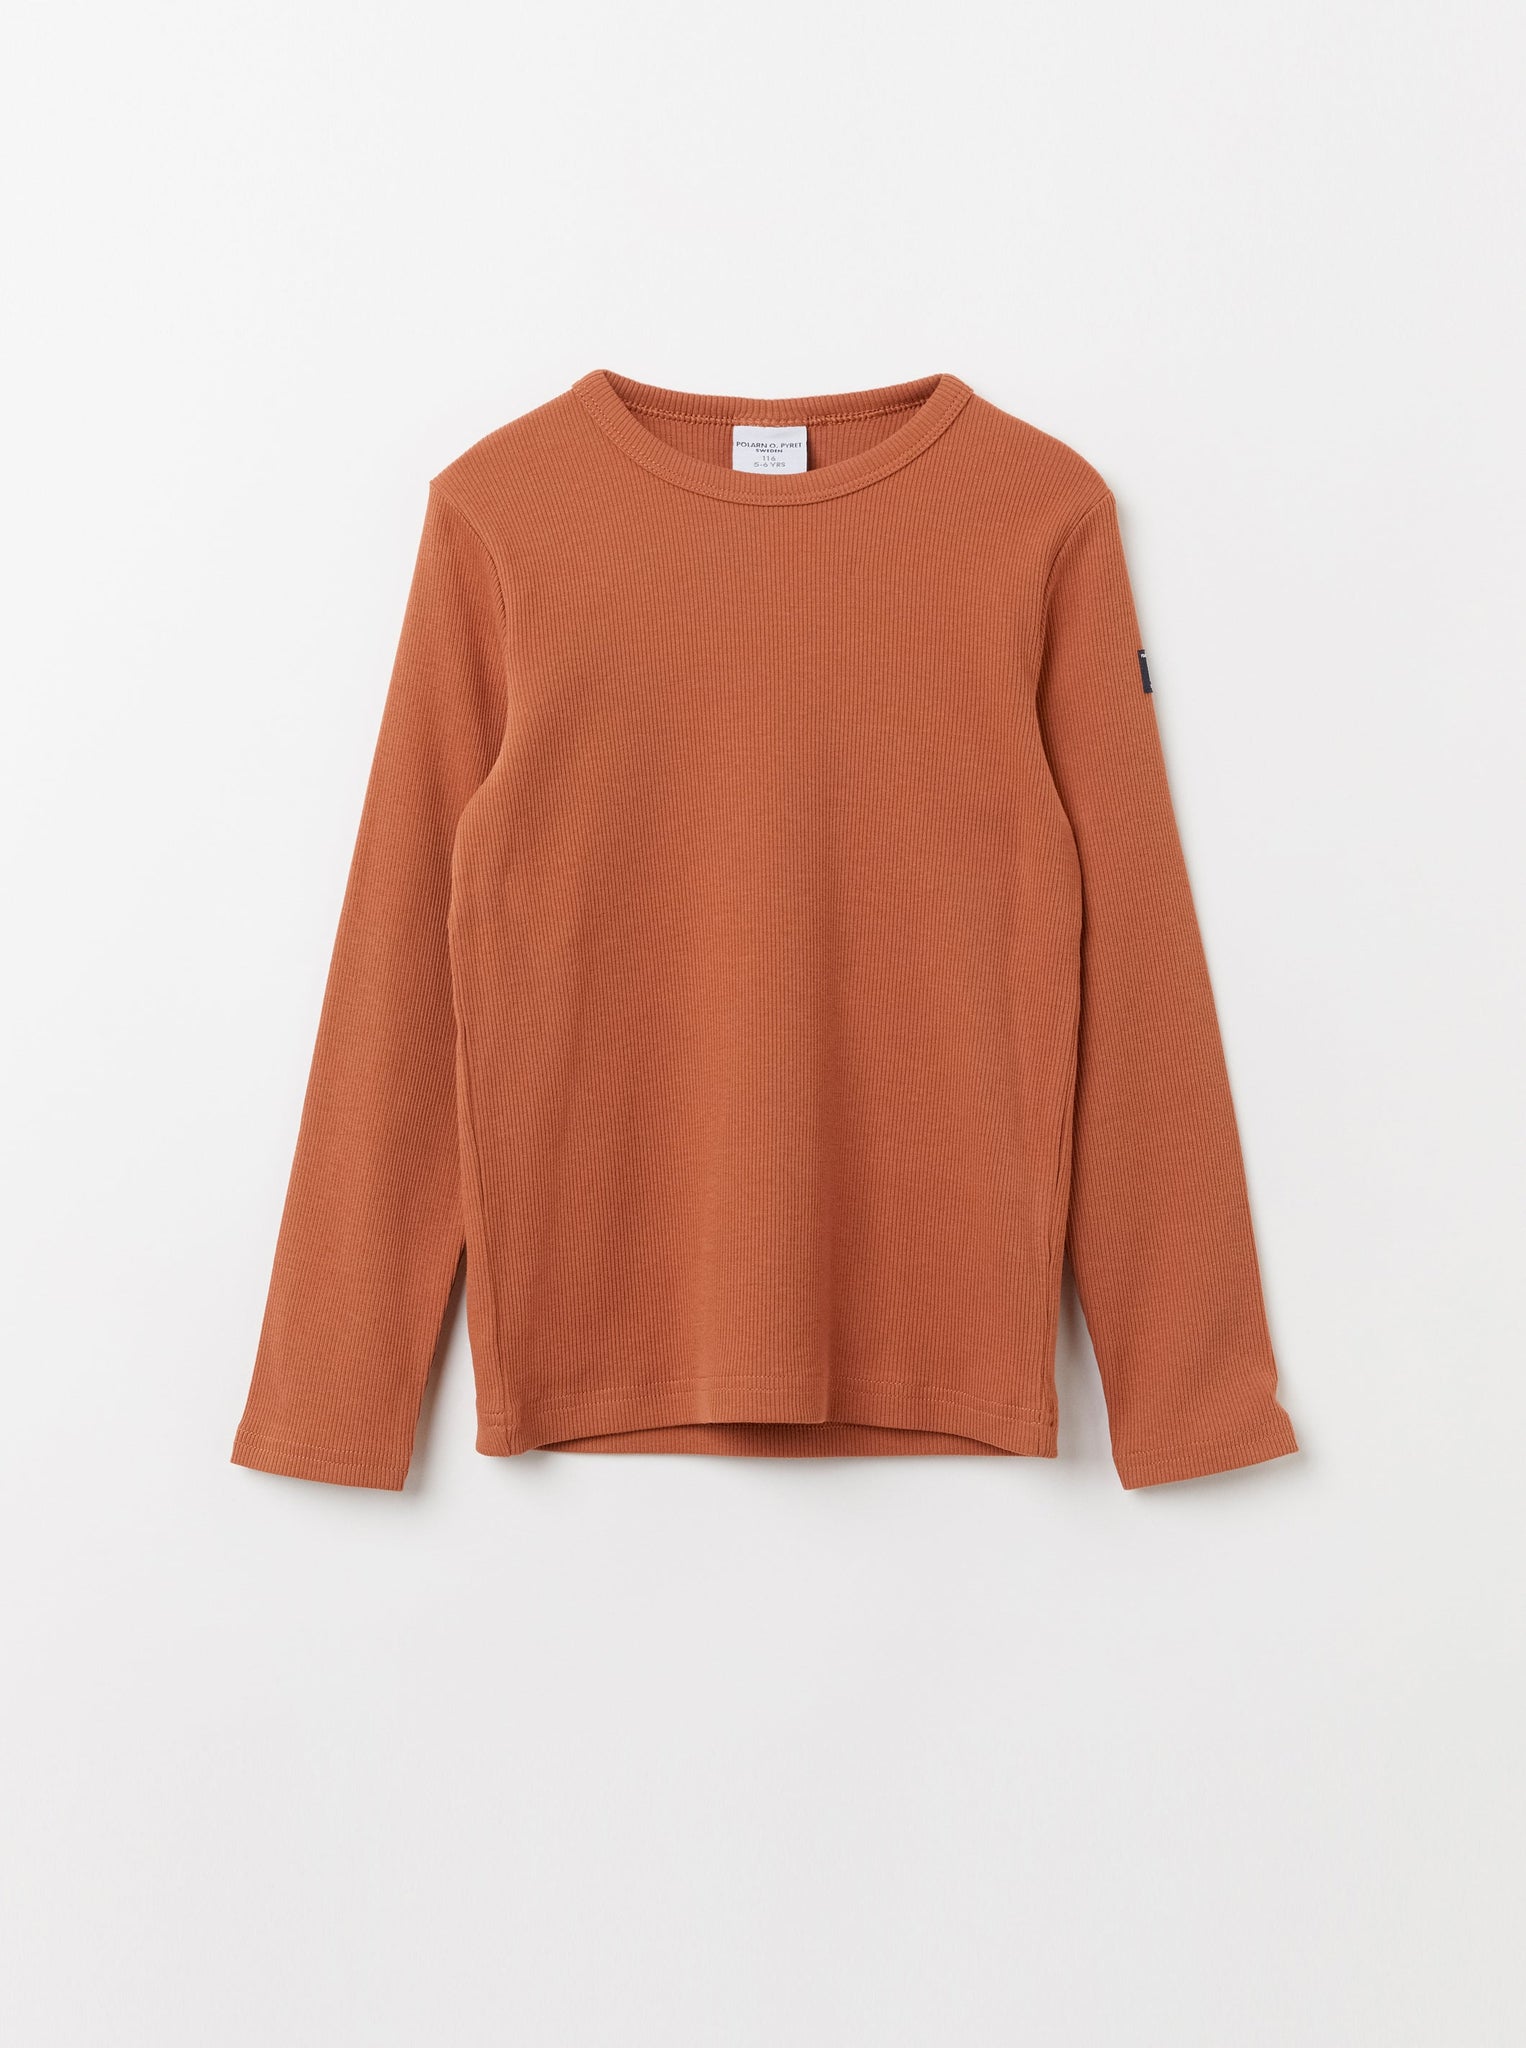 Orange Ribbed Kids Top from the Polarn O. Pyret Kidswear collection. The best ethical kids clothes